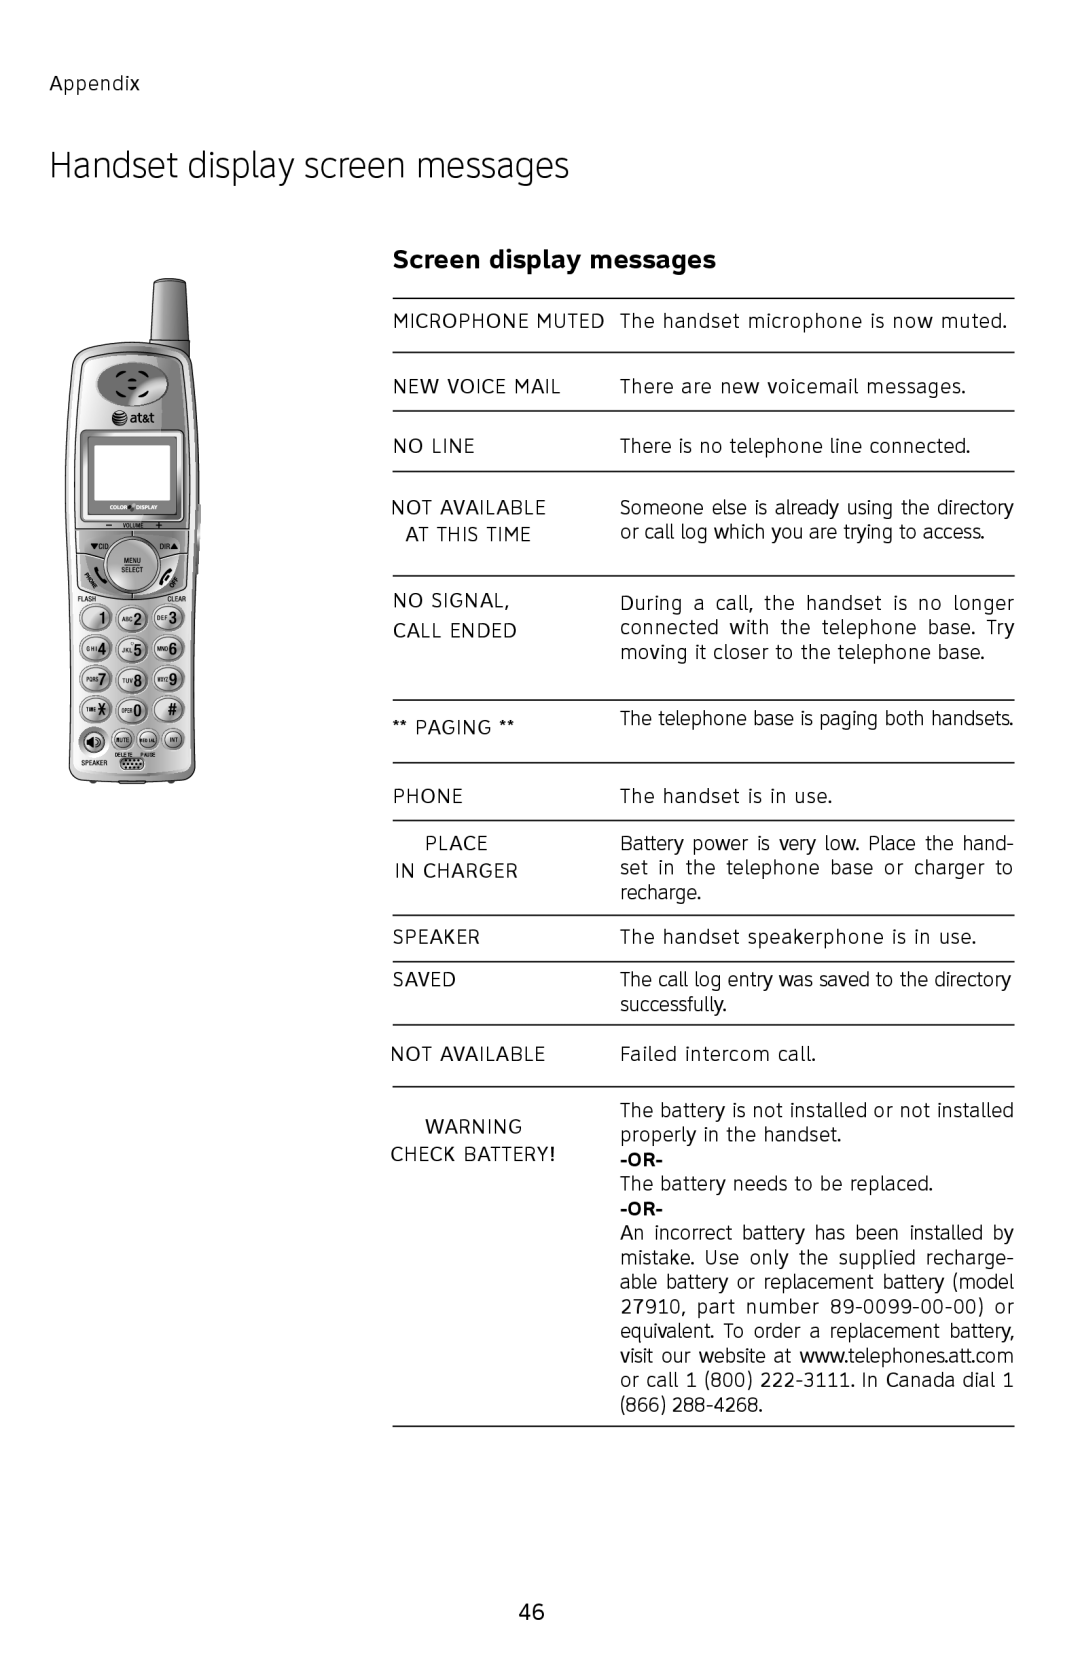 AT&T E2912 Handset display screen messages, Screen display messages, or call log which you are trying to access, Place 